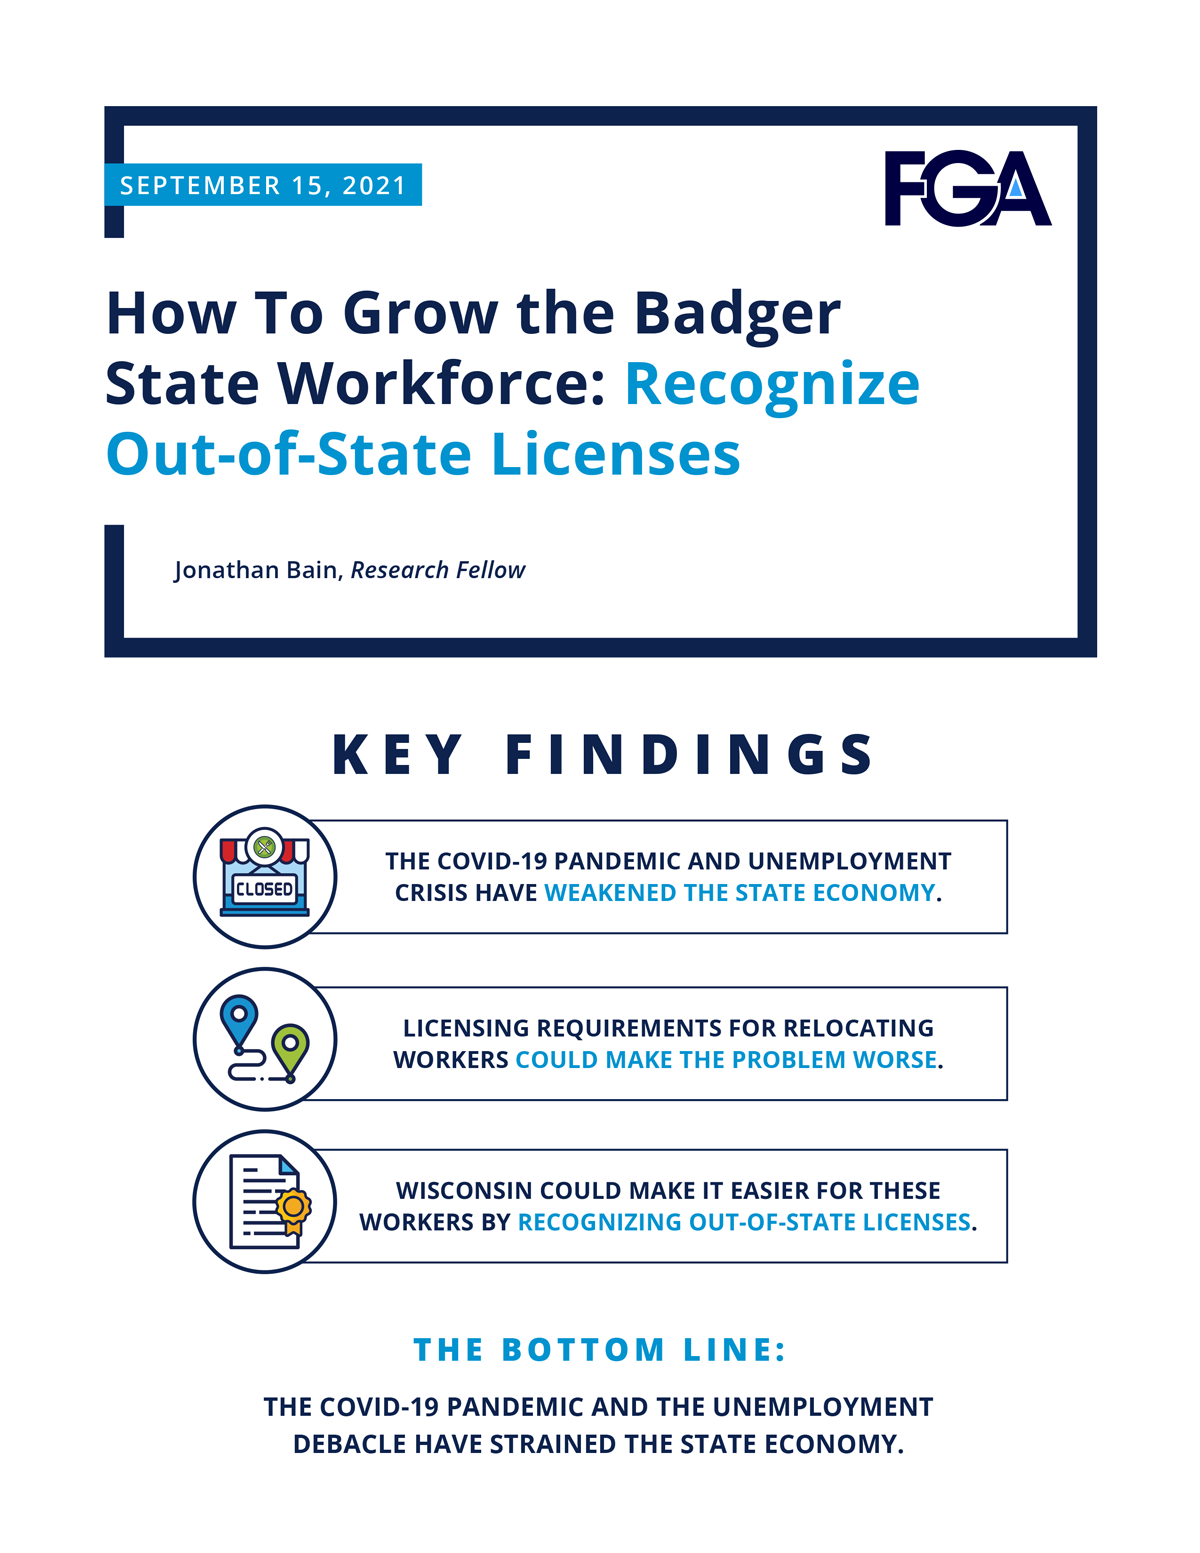 How To Grow the Badger State Workforce: Recognize Out-of-State Licenses